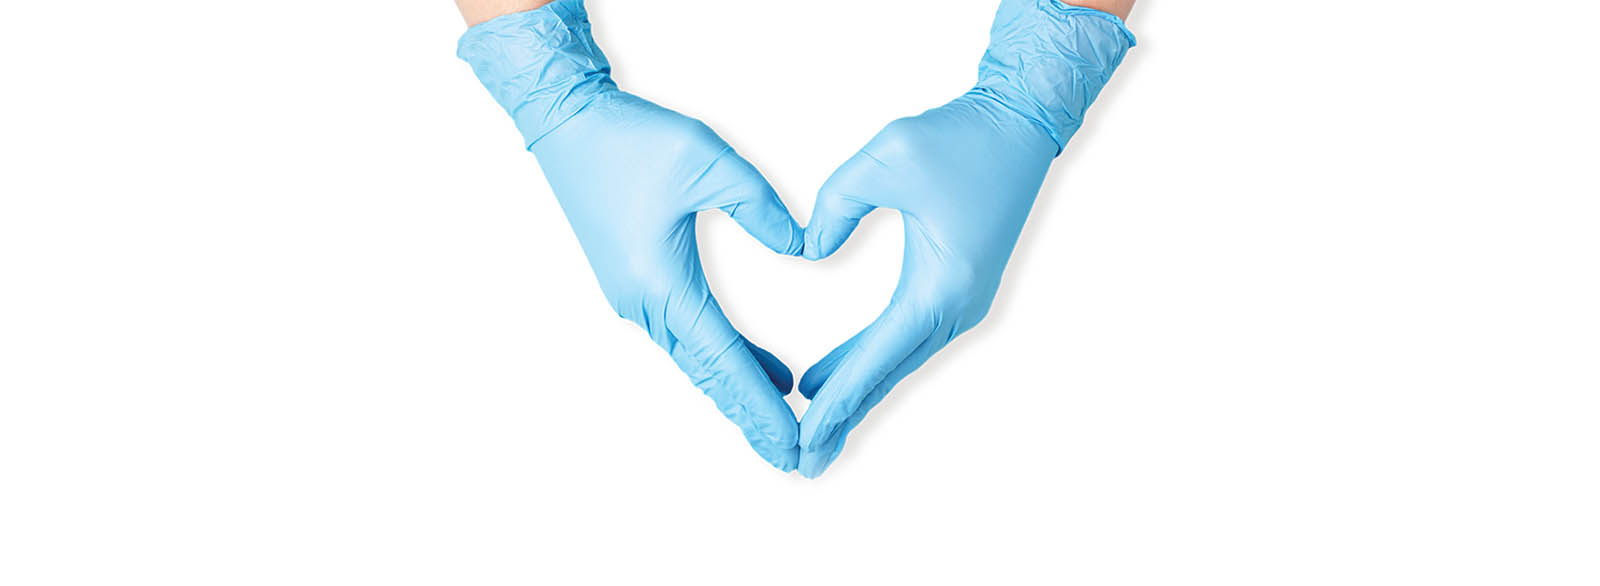 Hands with surgical gloves clasped forming a heart.